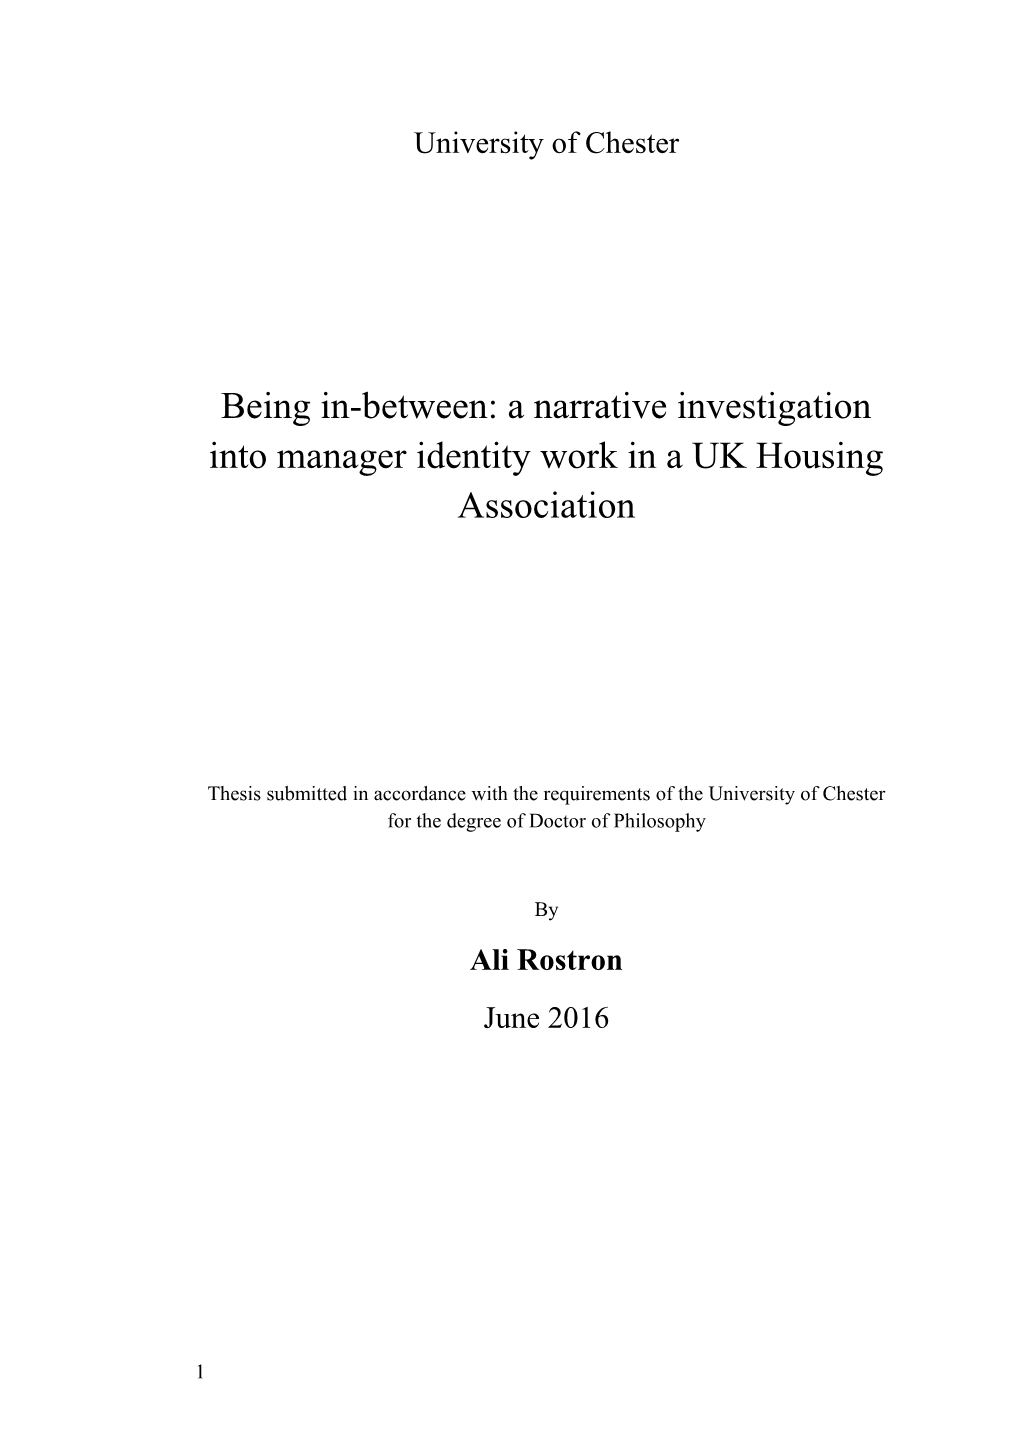 Being In-Between: a Narrative Investigation Into Manager Identity Work in a UK Housing